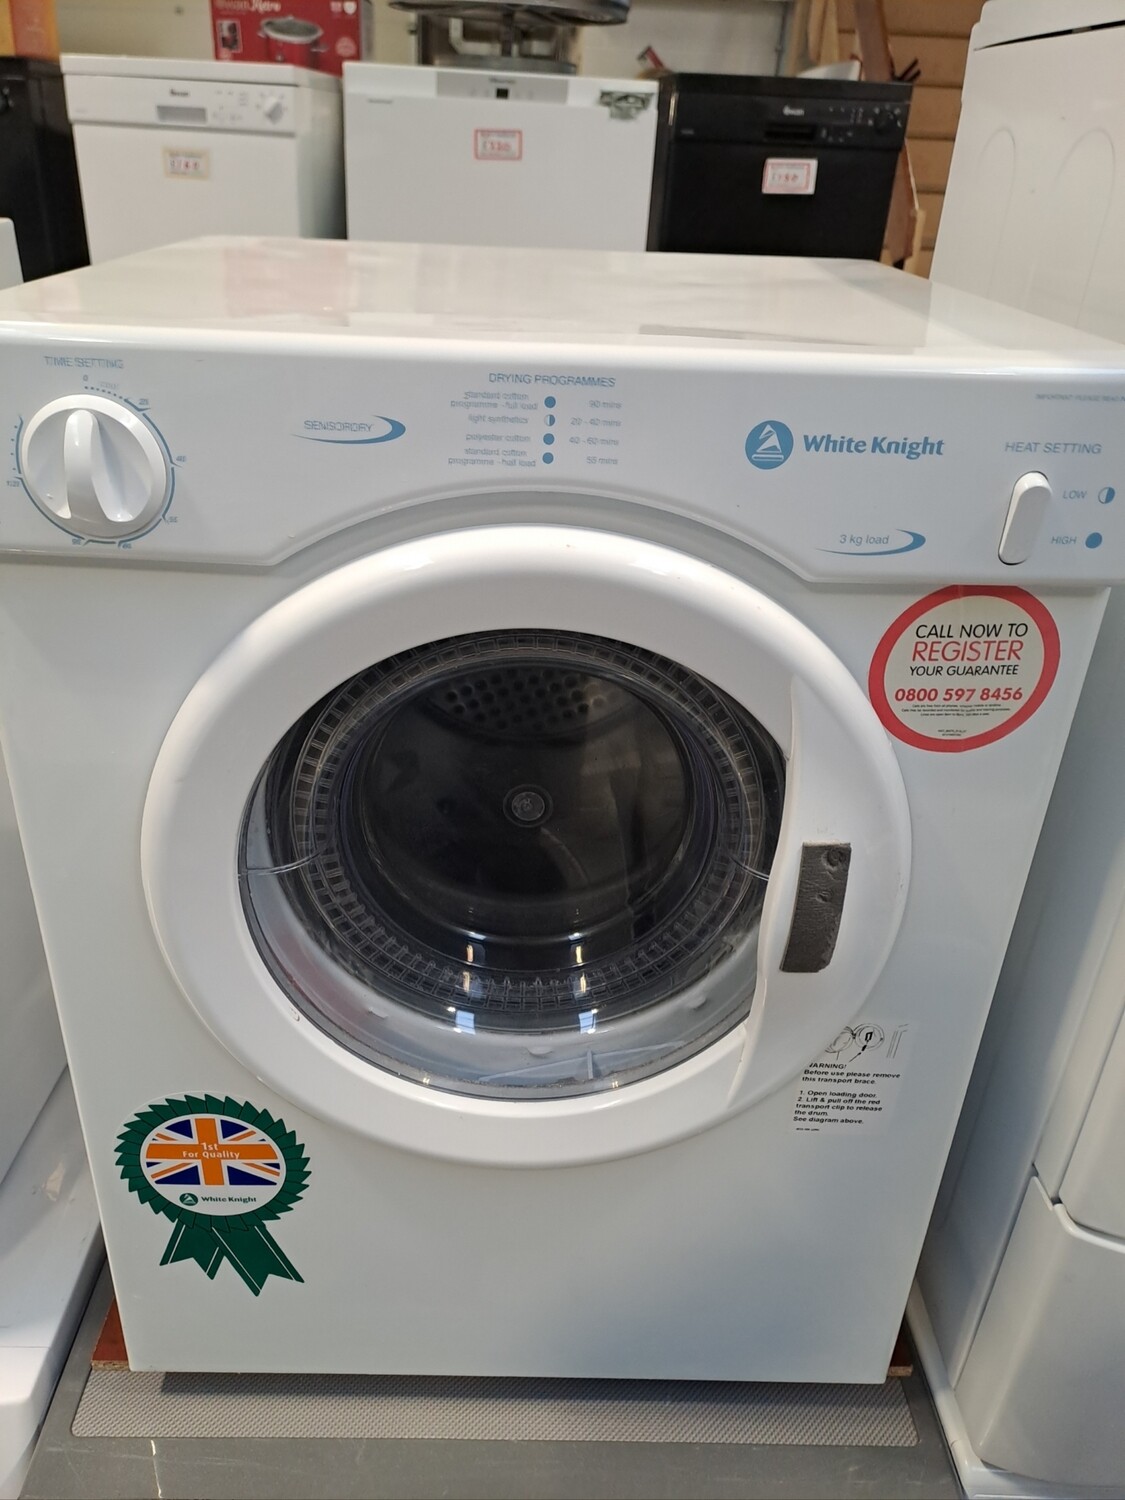 White Knight C372WV 3KG Compact Tumble Dryer White Refurbished H67cm
W49cm
D48cm 6 Months Guarantee